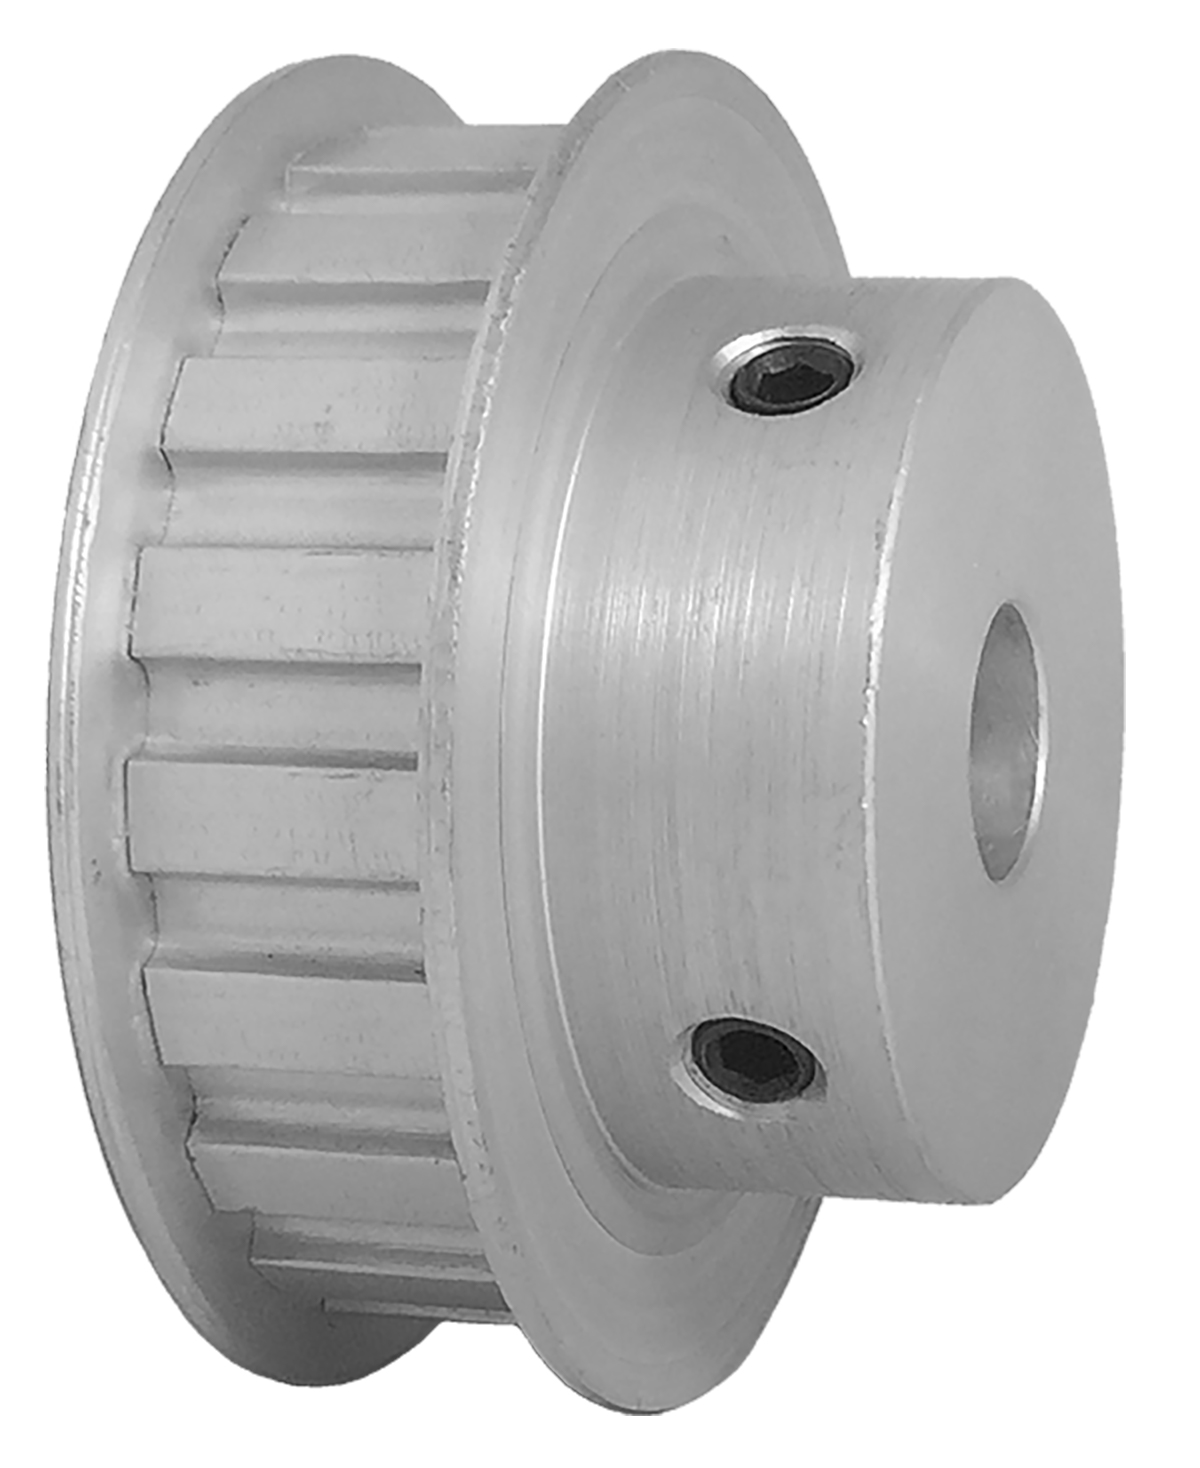 19L050-6FA6 - Aluminum Imperial Pitch Pulleys